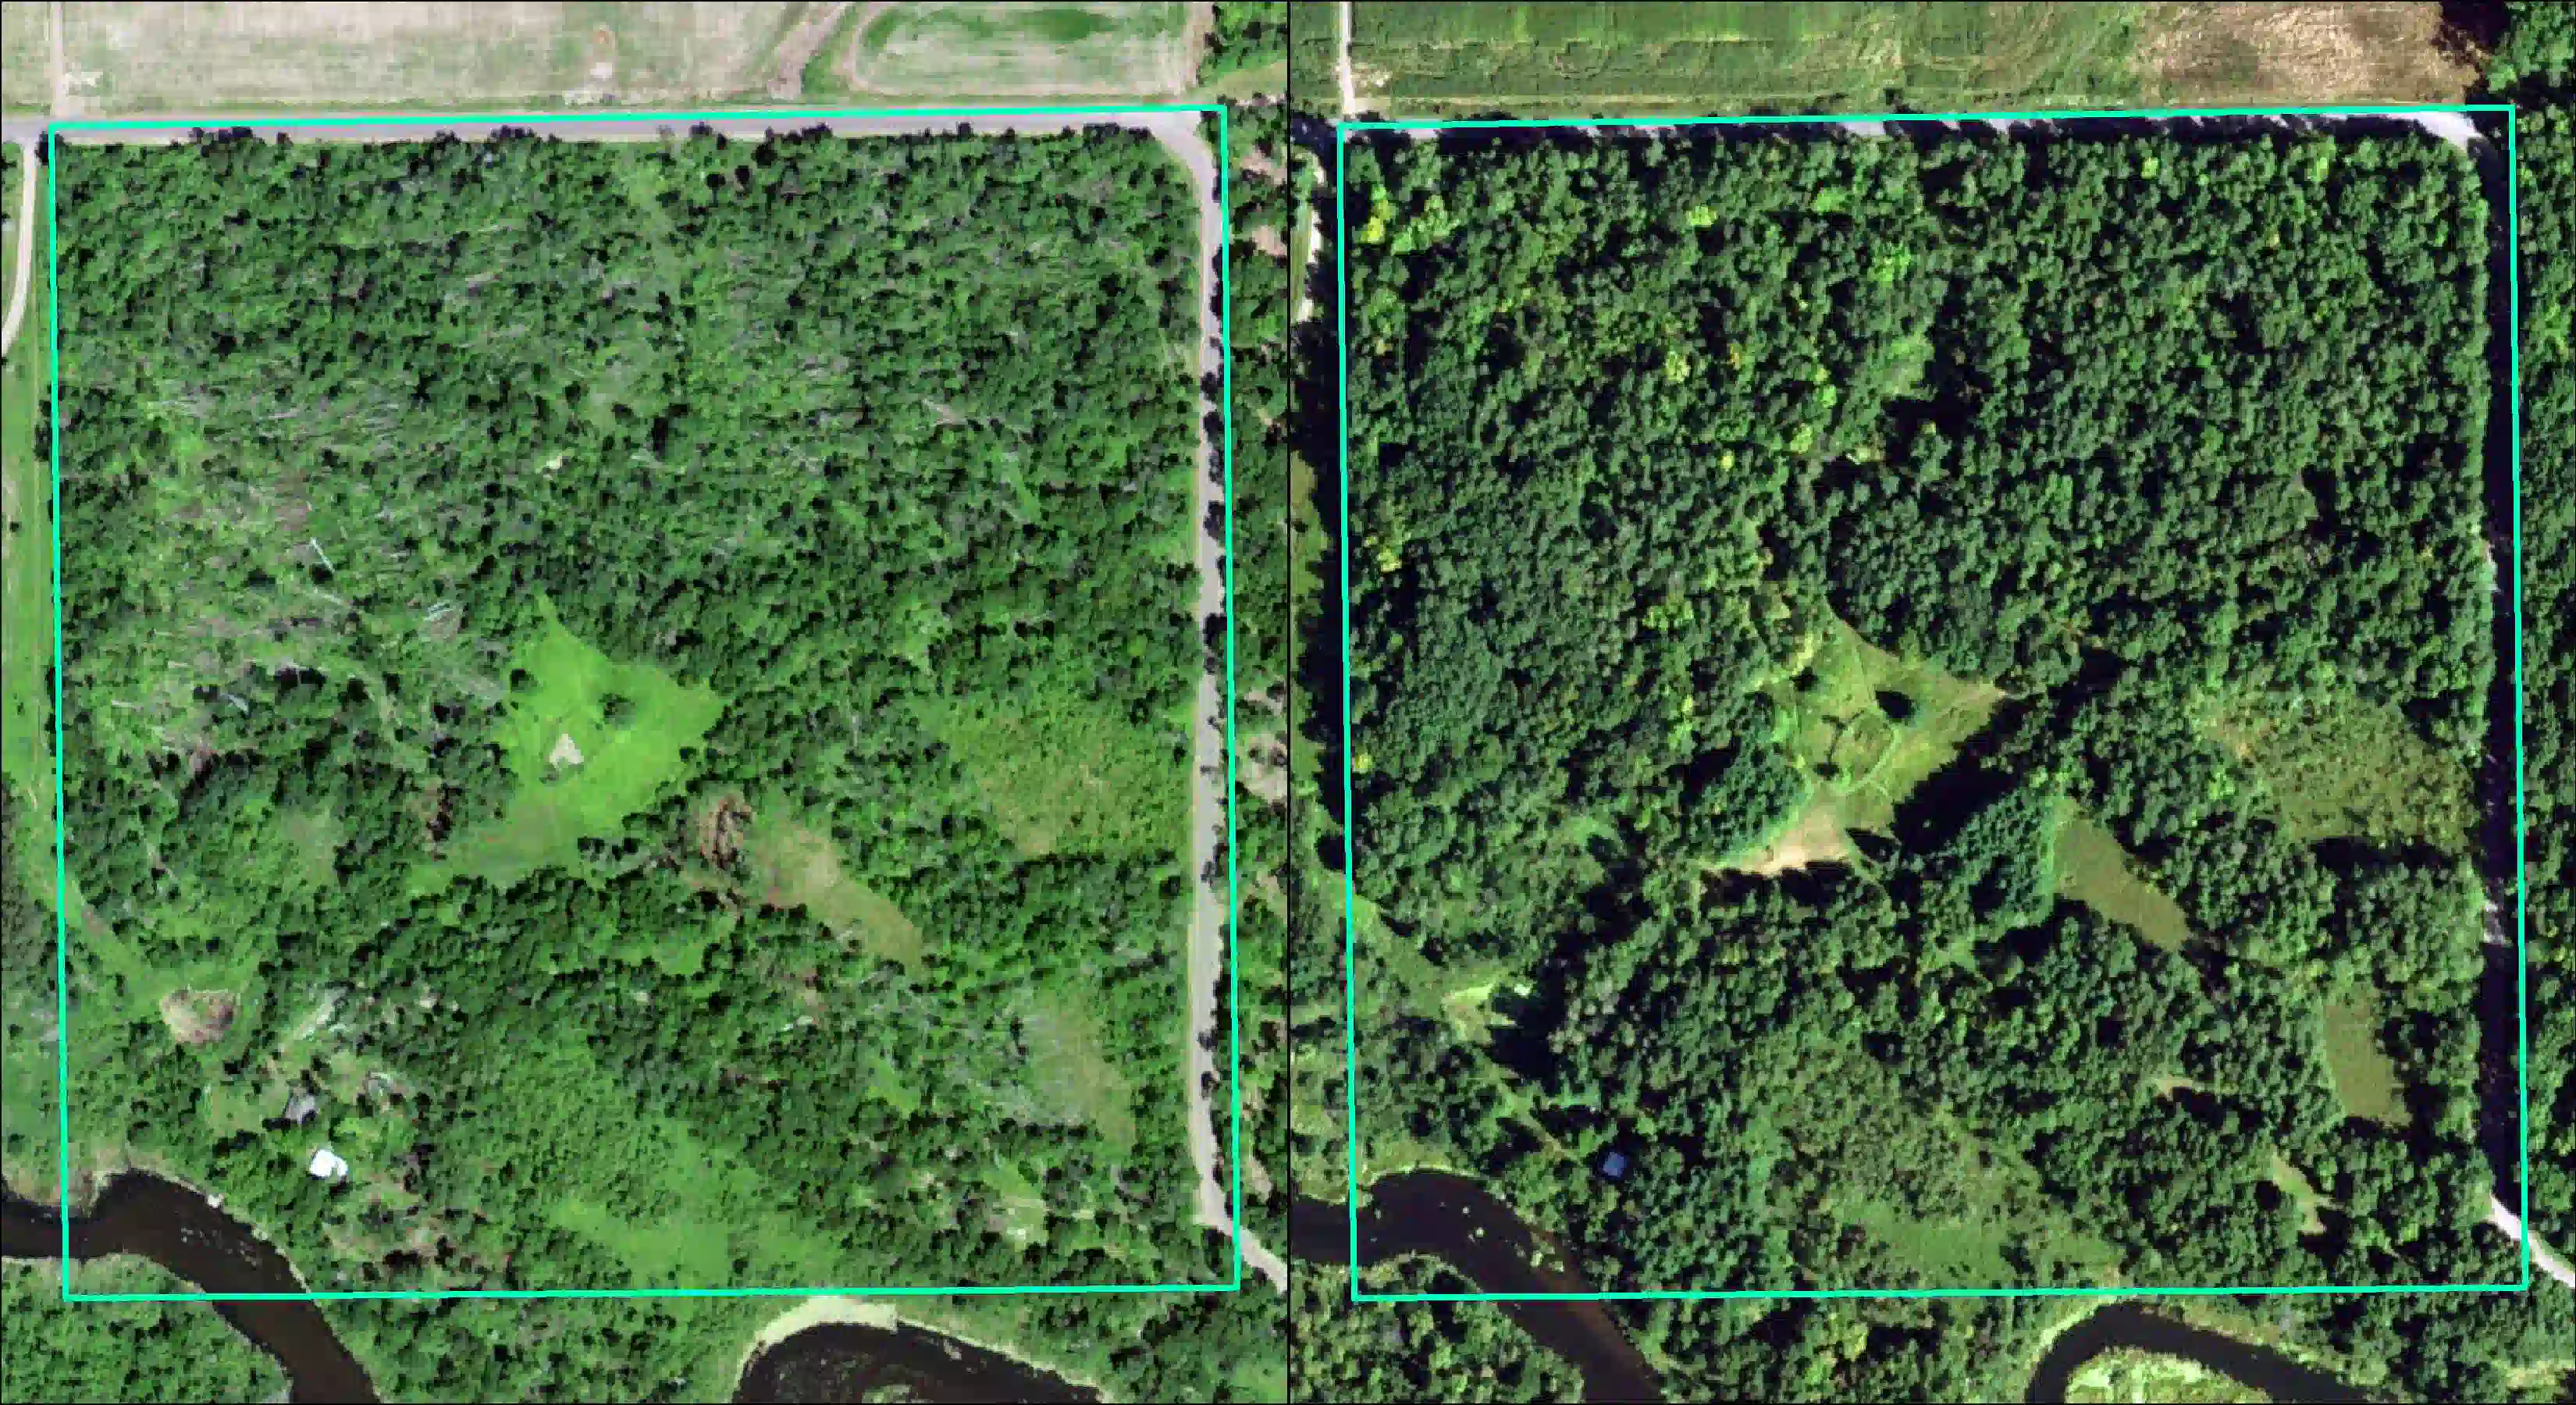 A side-by-side comparison of two leaf-on aerial imagery. Property boundary is presented for reference as a square turquoise outline.